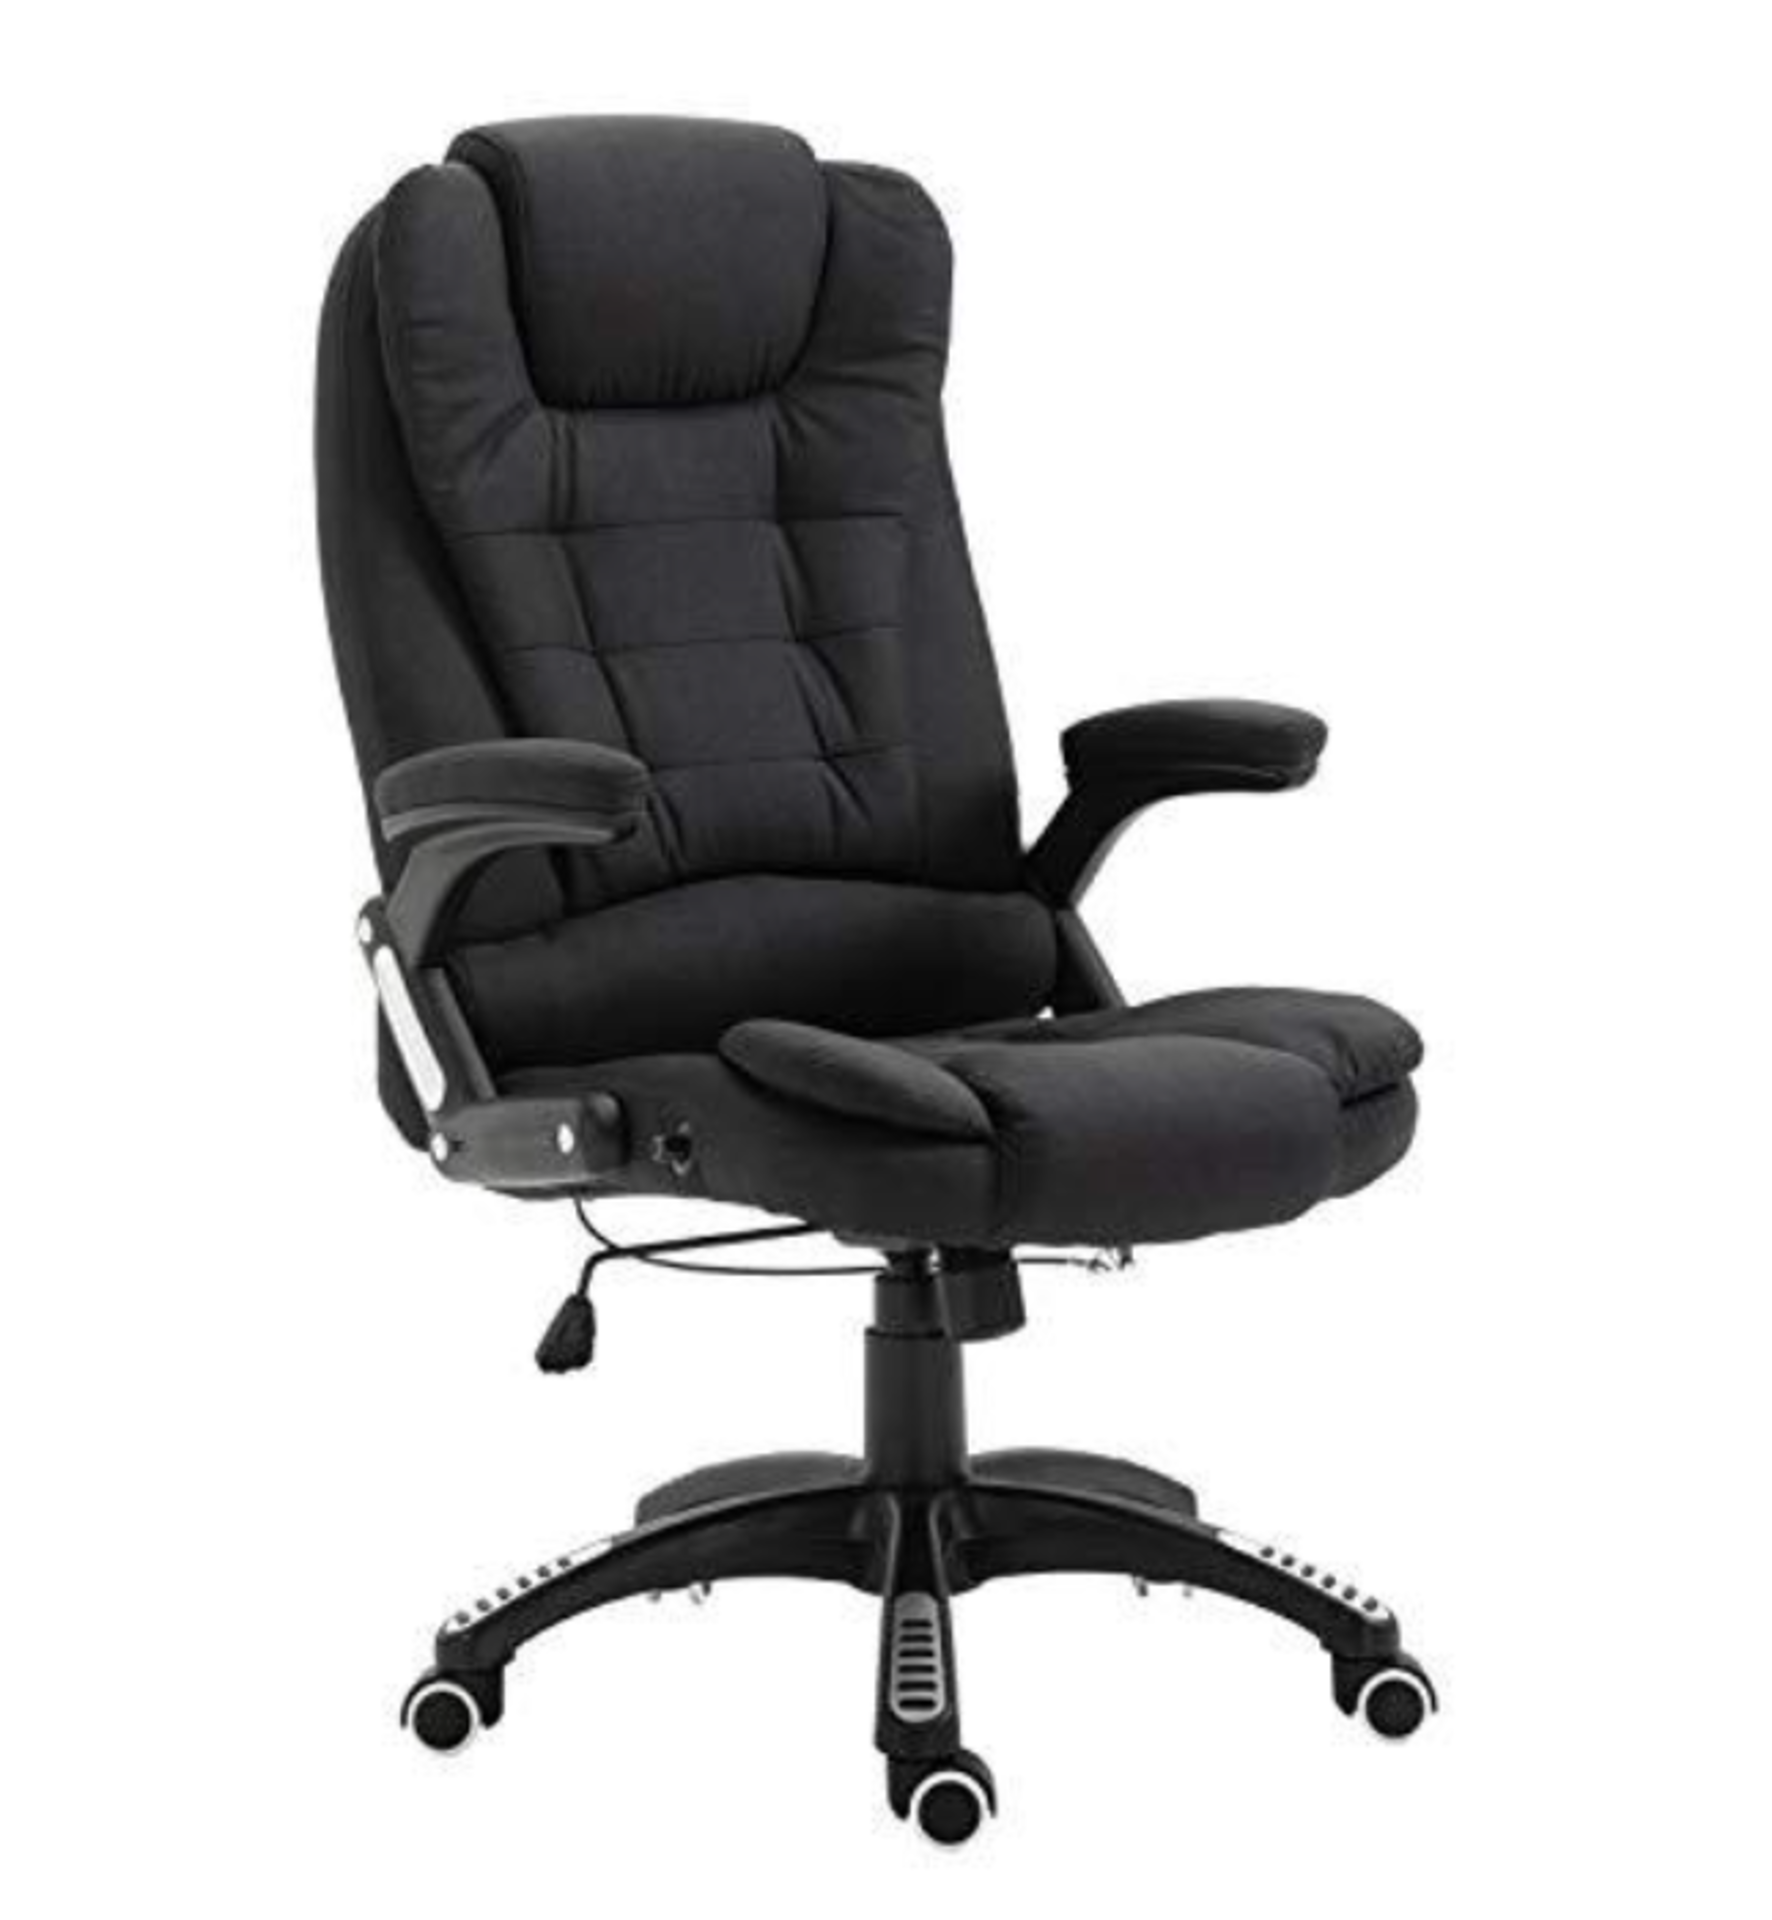 Cherry Tree Furniture Executive Recline Extra Padded Office Chair Standard, MO17 Black Fabric - SR6